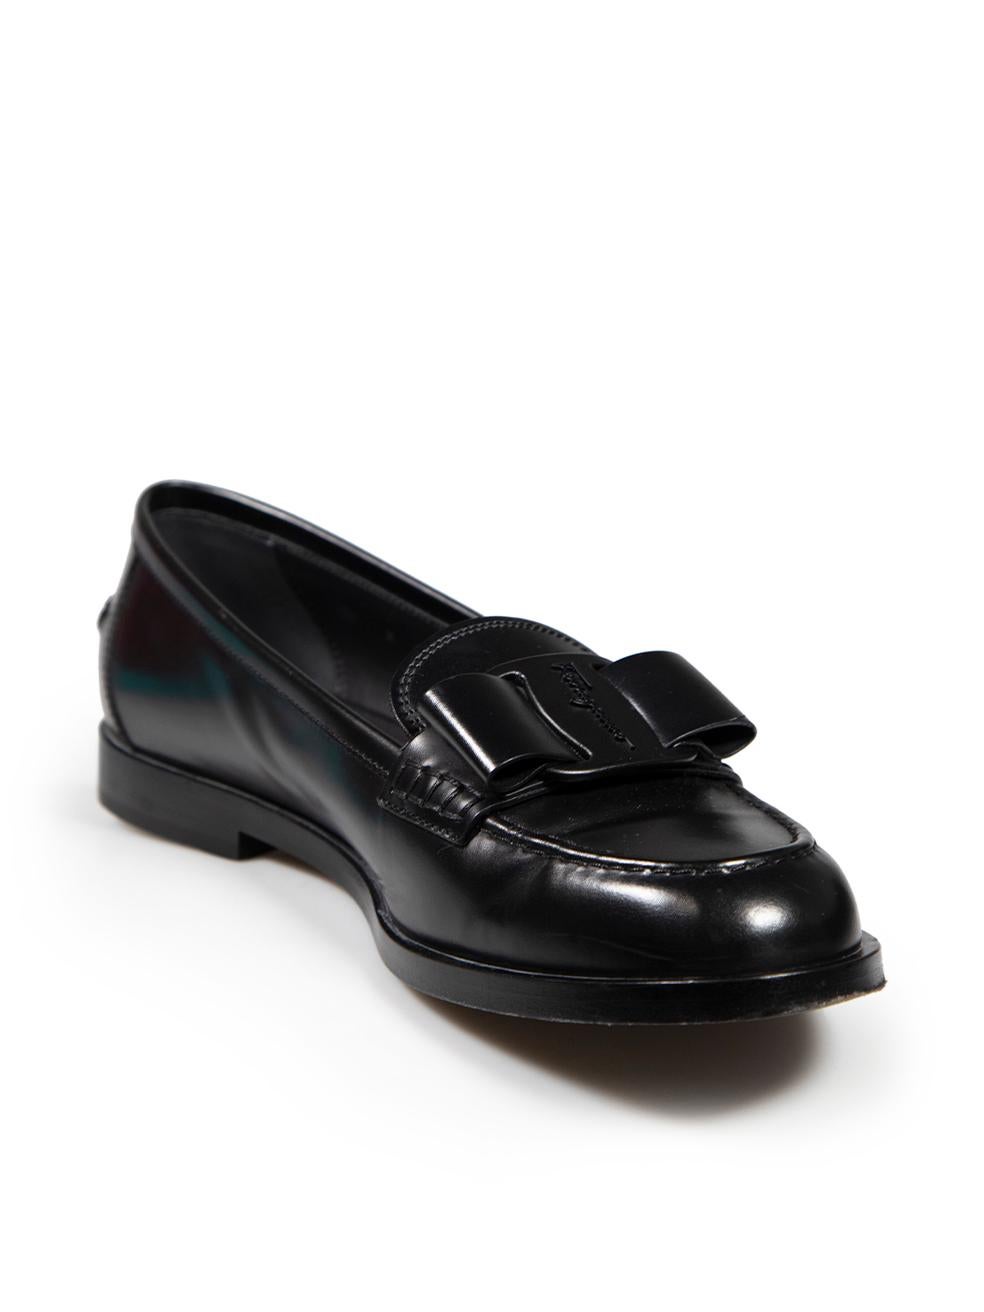 CONDITION is Very good. Hardly any visible wear to shoes is evident on this used Salvatore Ferragamo designer resale item. These shoes come with original box and dust bags.
 
 Details
 Model: Vivaldo
 Black
 Leather
 Loafers
 Round toe
 Logo buckle